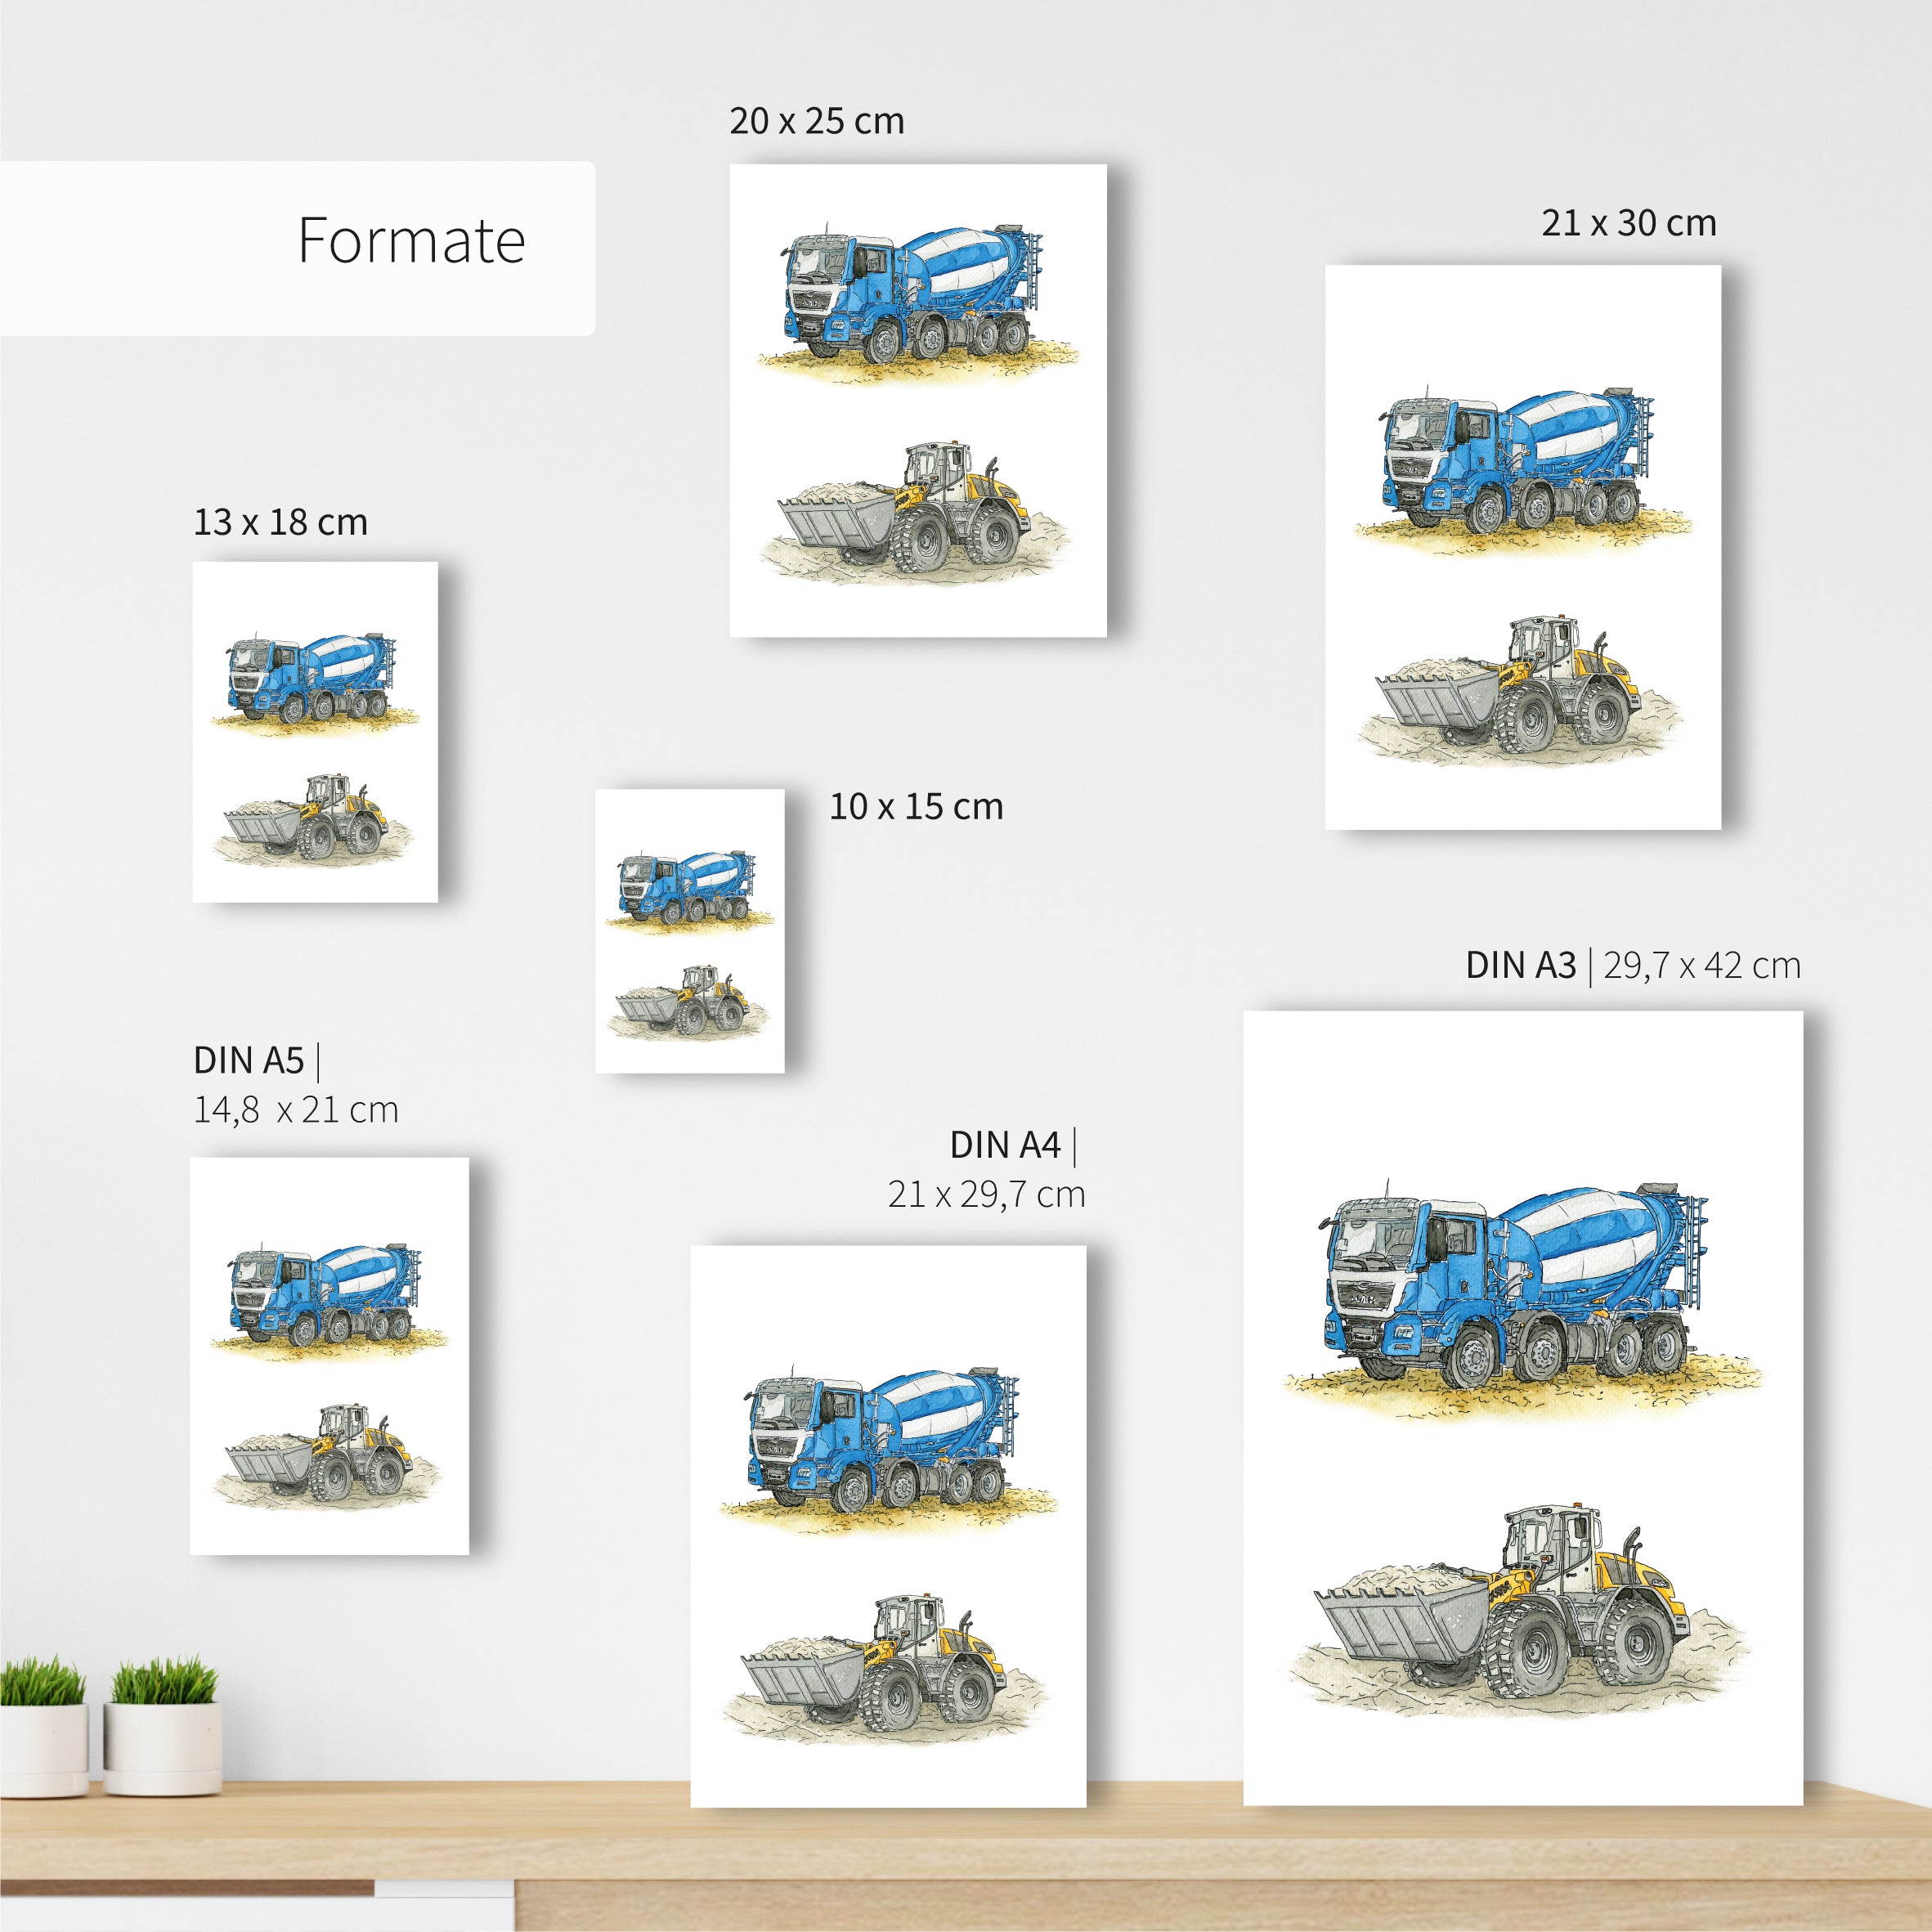 Vehicle Poster - Excavator and Loader | Picture for the children's room | gift idea